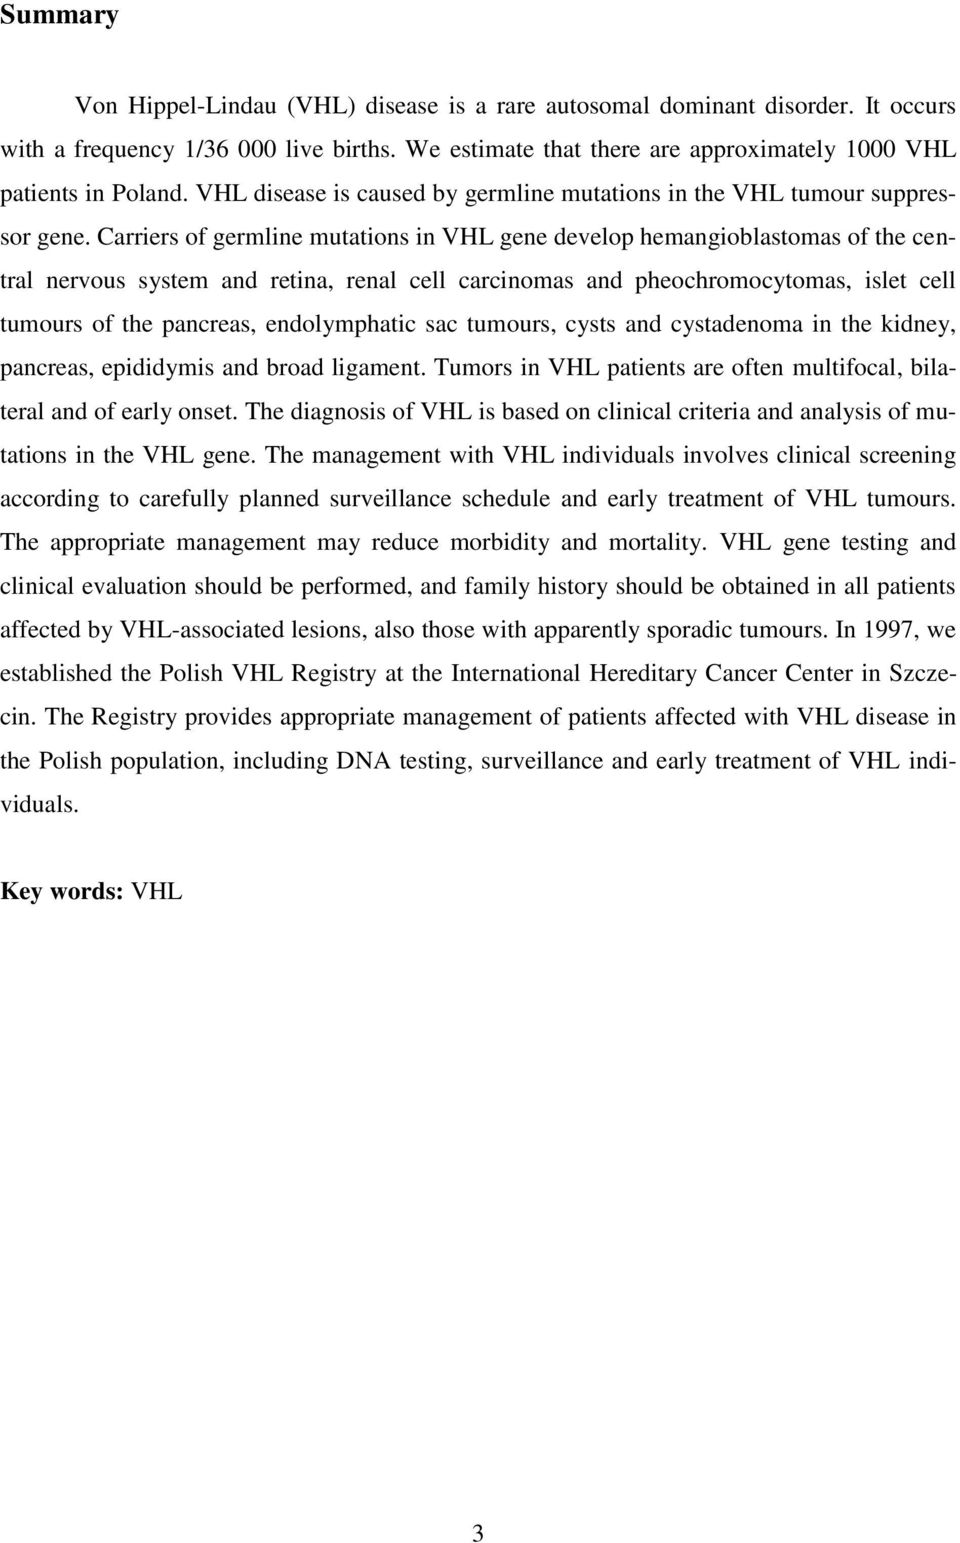 Carriers of germline mutations in VHL gene develop hemangioblastomas of the central nervous system and retina, renal cell carcinomas and pheochromocytomas, islet cell tumours of the pancreas,